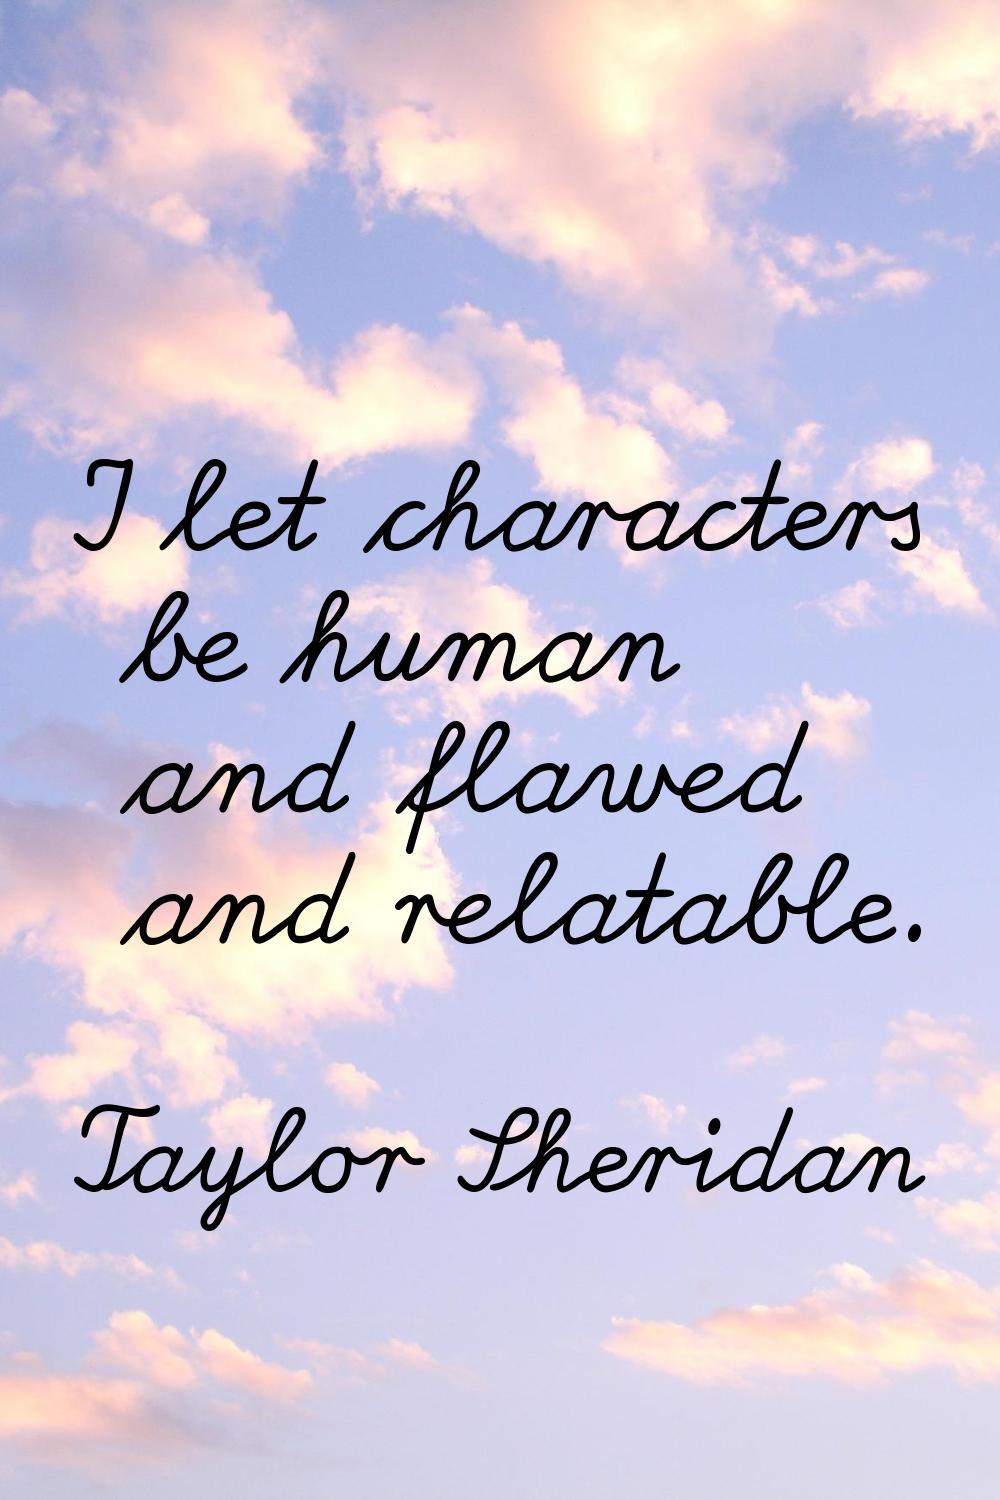 I let characters be human and flawed and relatable.